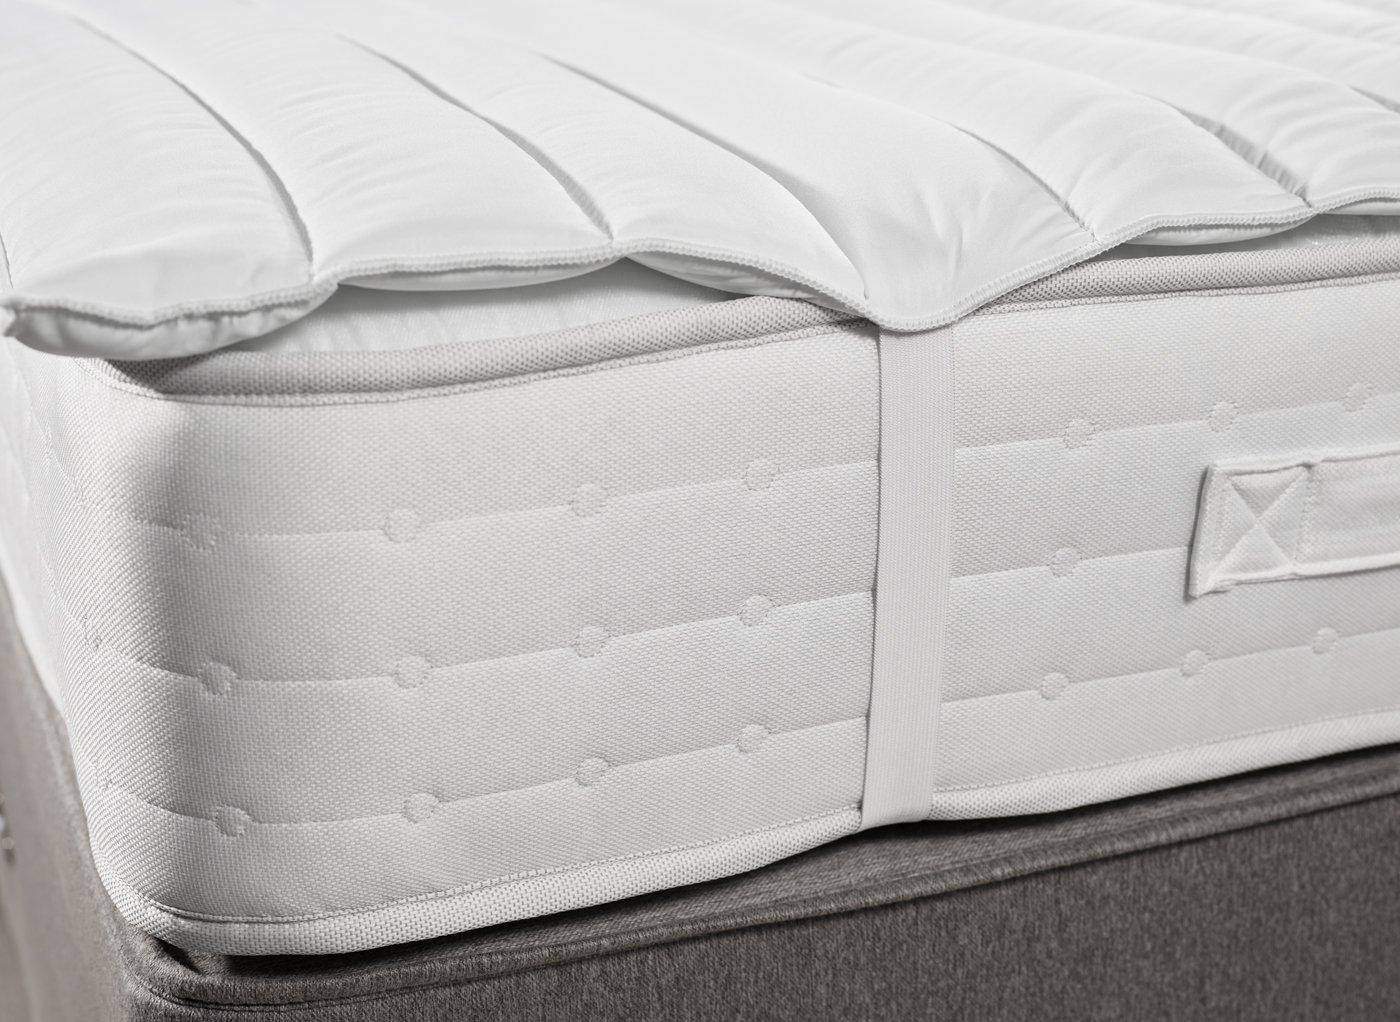 king size anti allergy mattress cover